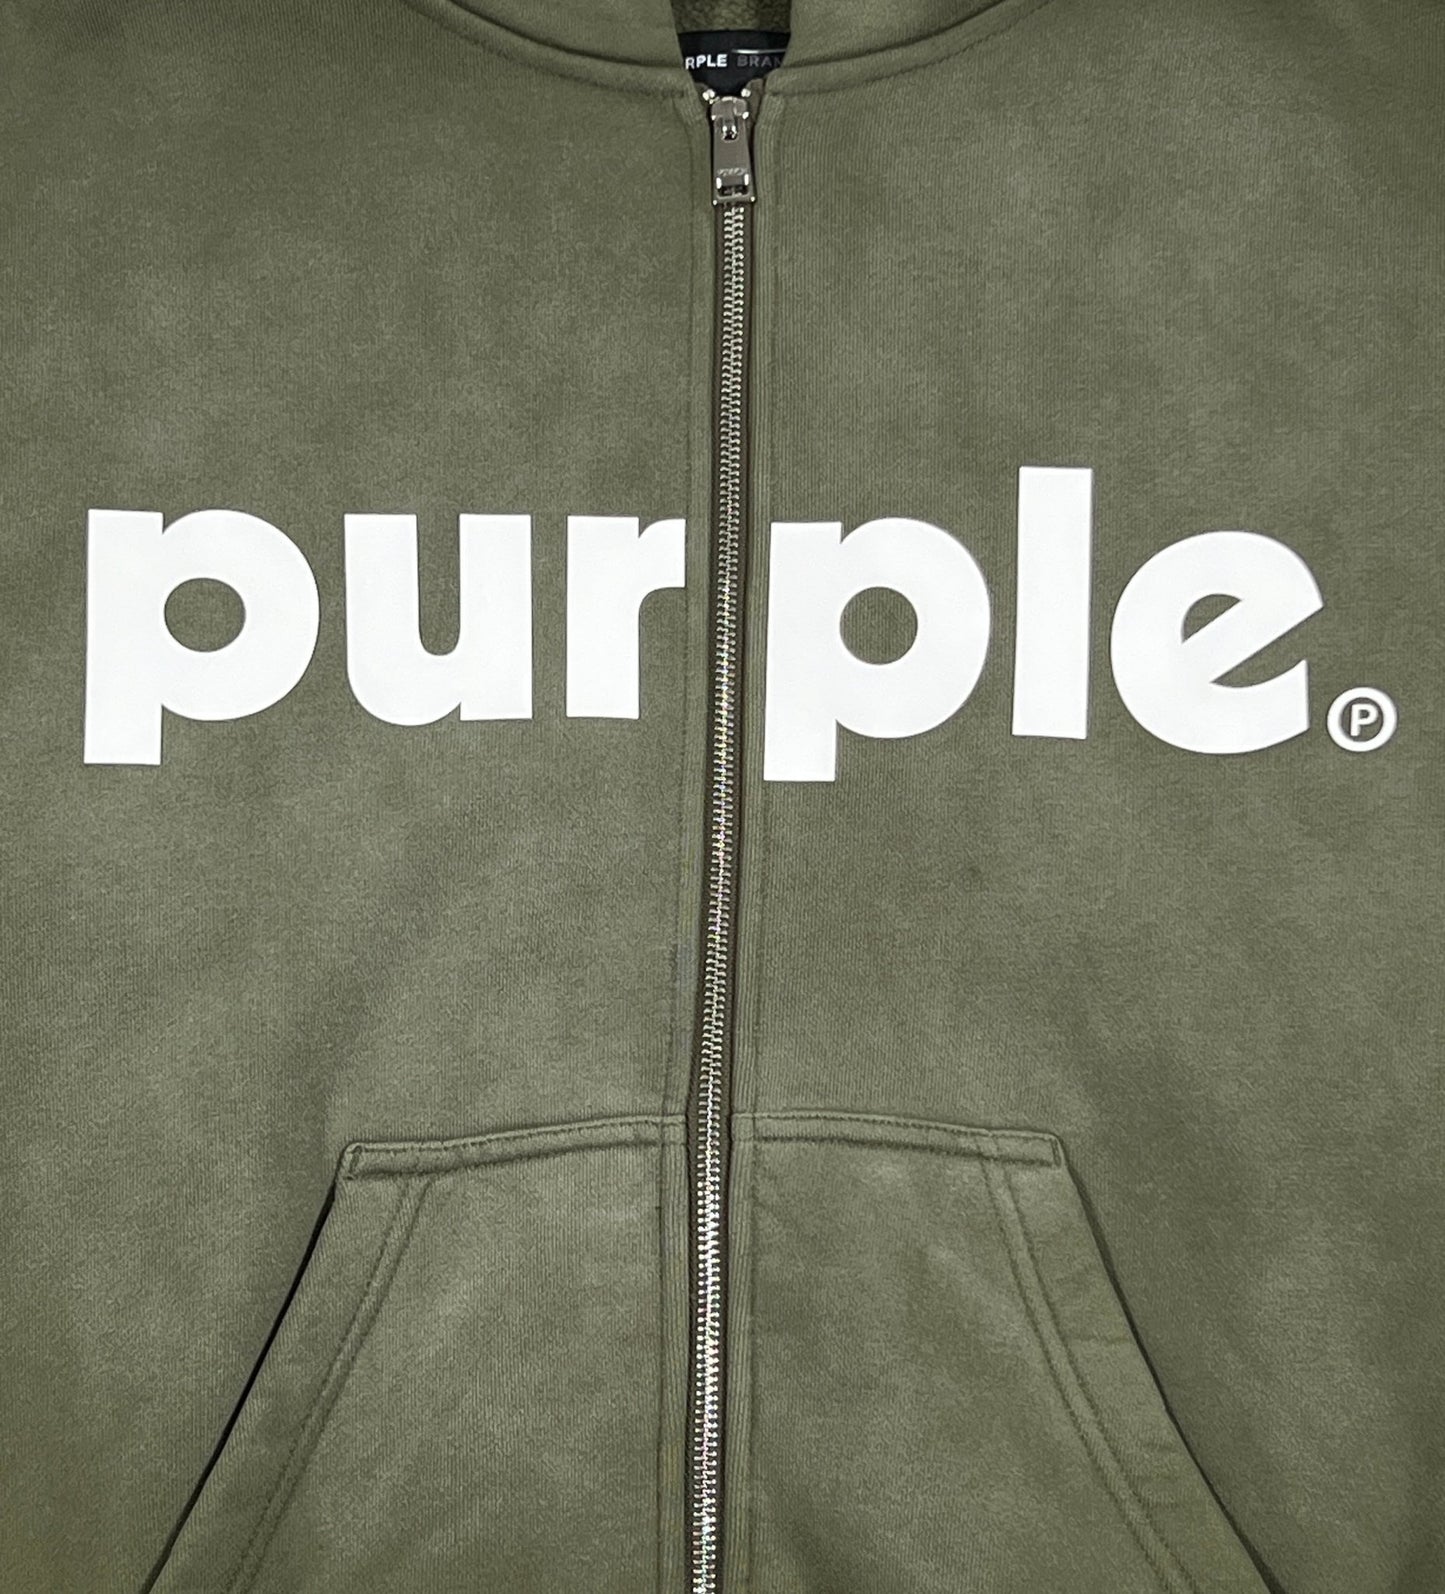 An olive green zip-up hoodie with the word "PURPLE BRAND" on it.